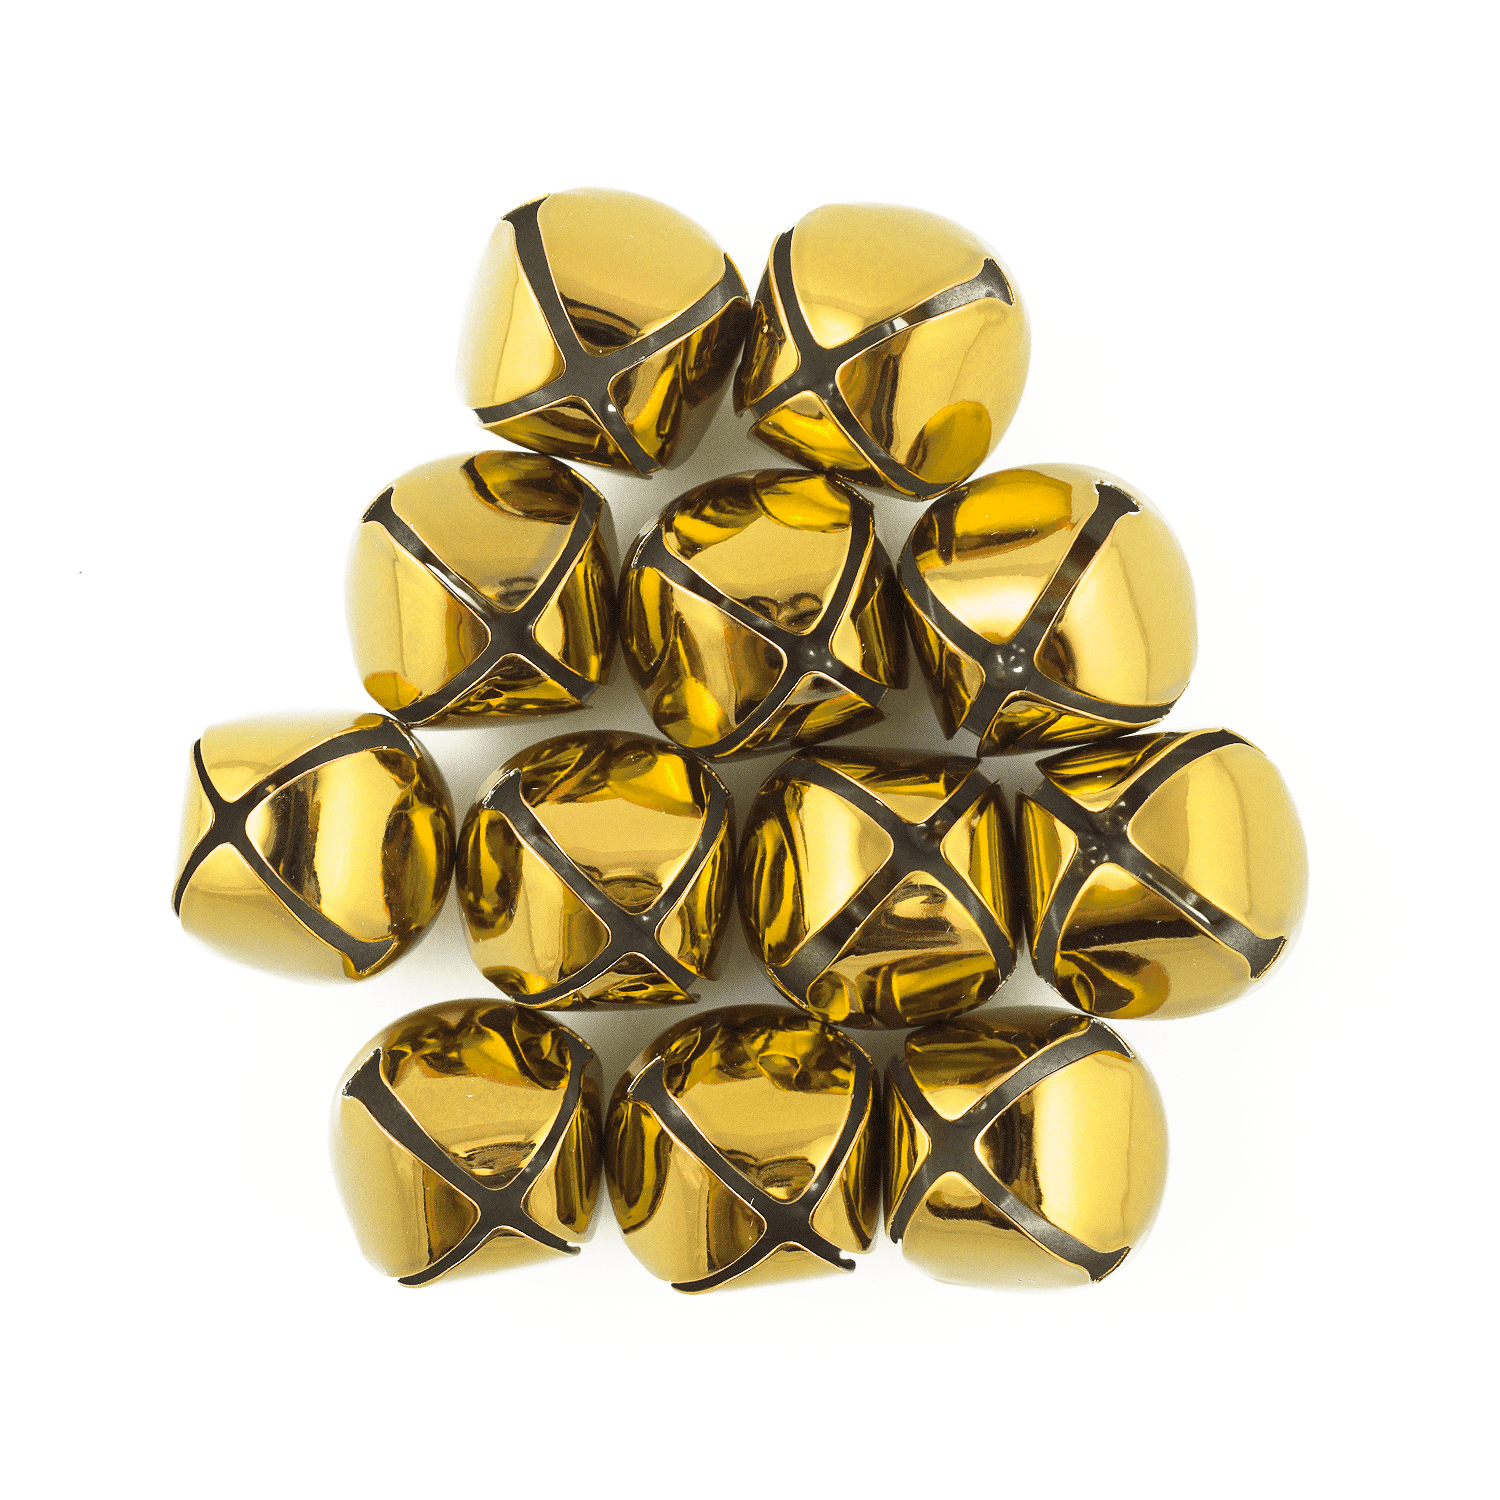 I-MART 100 Pcs Small Christmas Jingle Bells, 1 Inch Bell for DIY Crafts  (Gold)